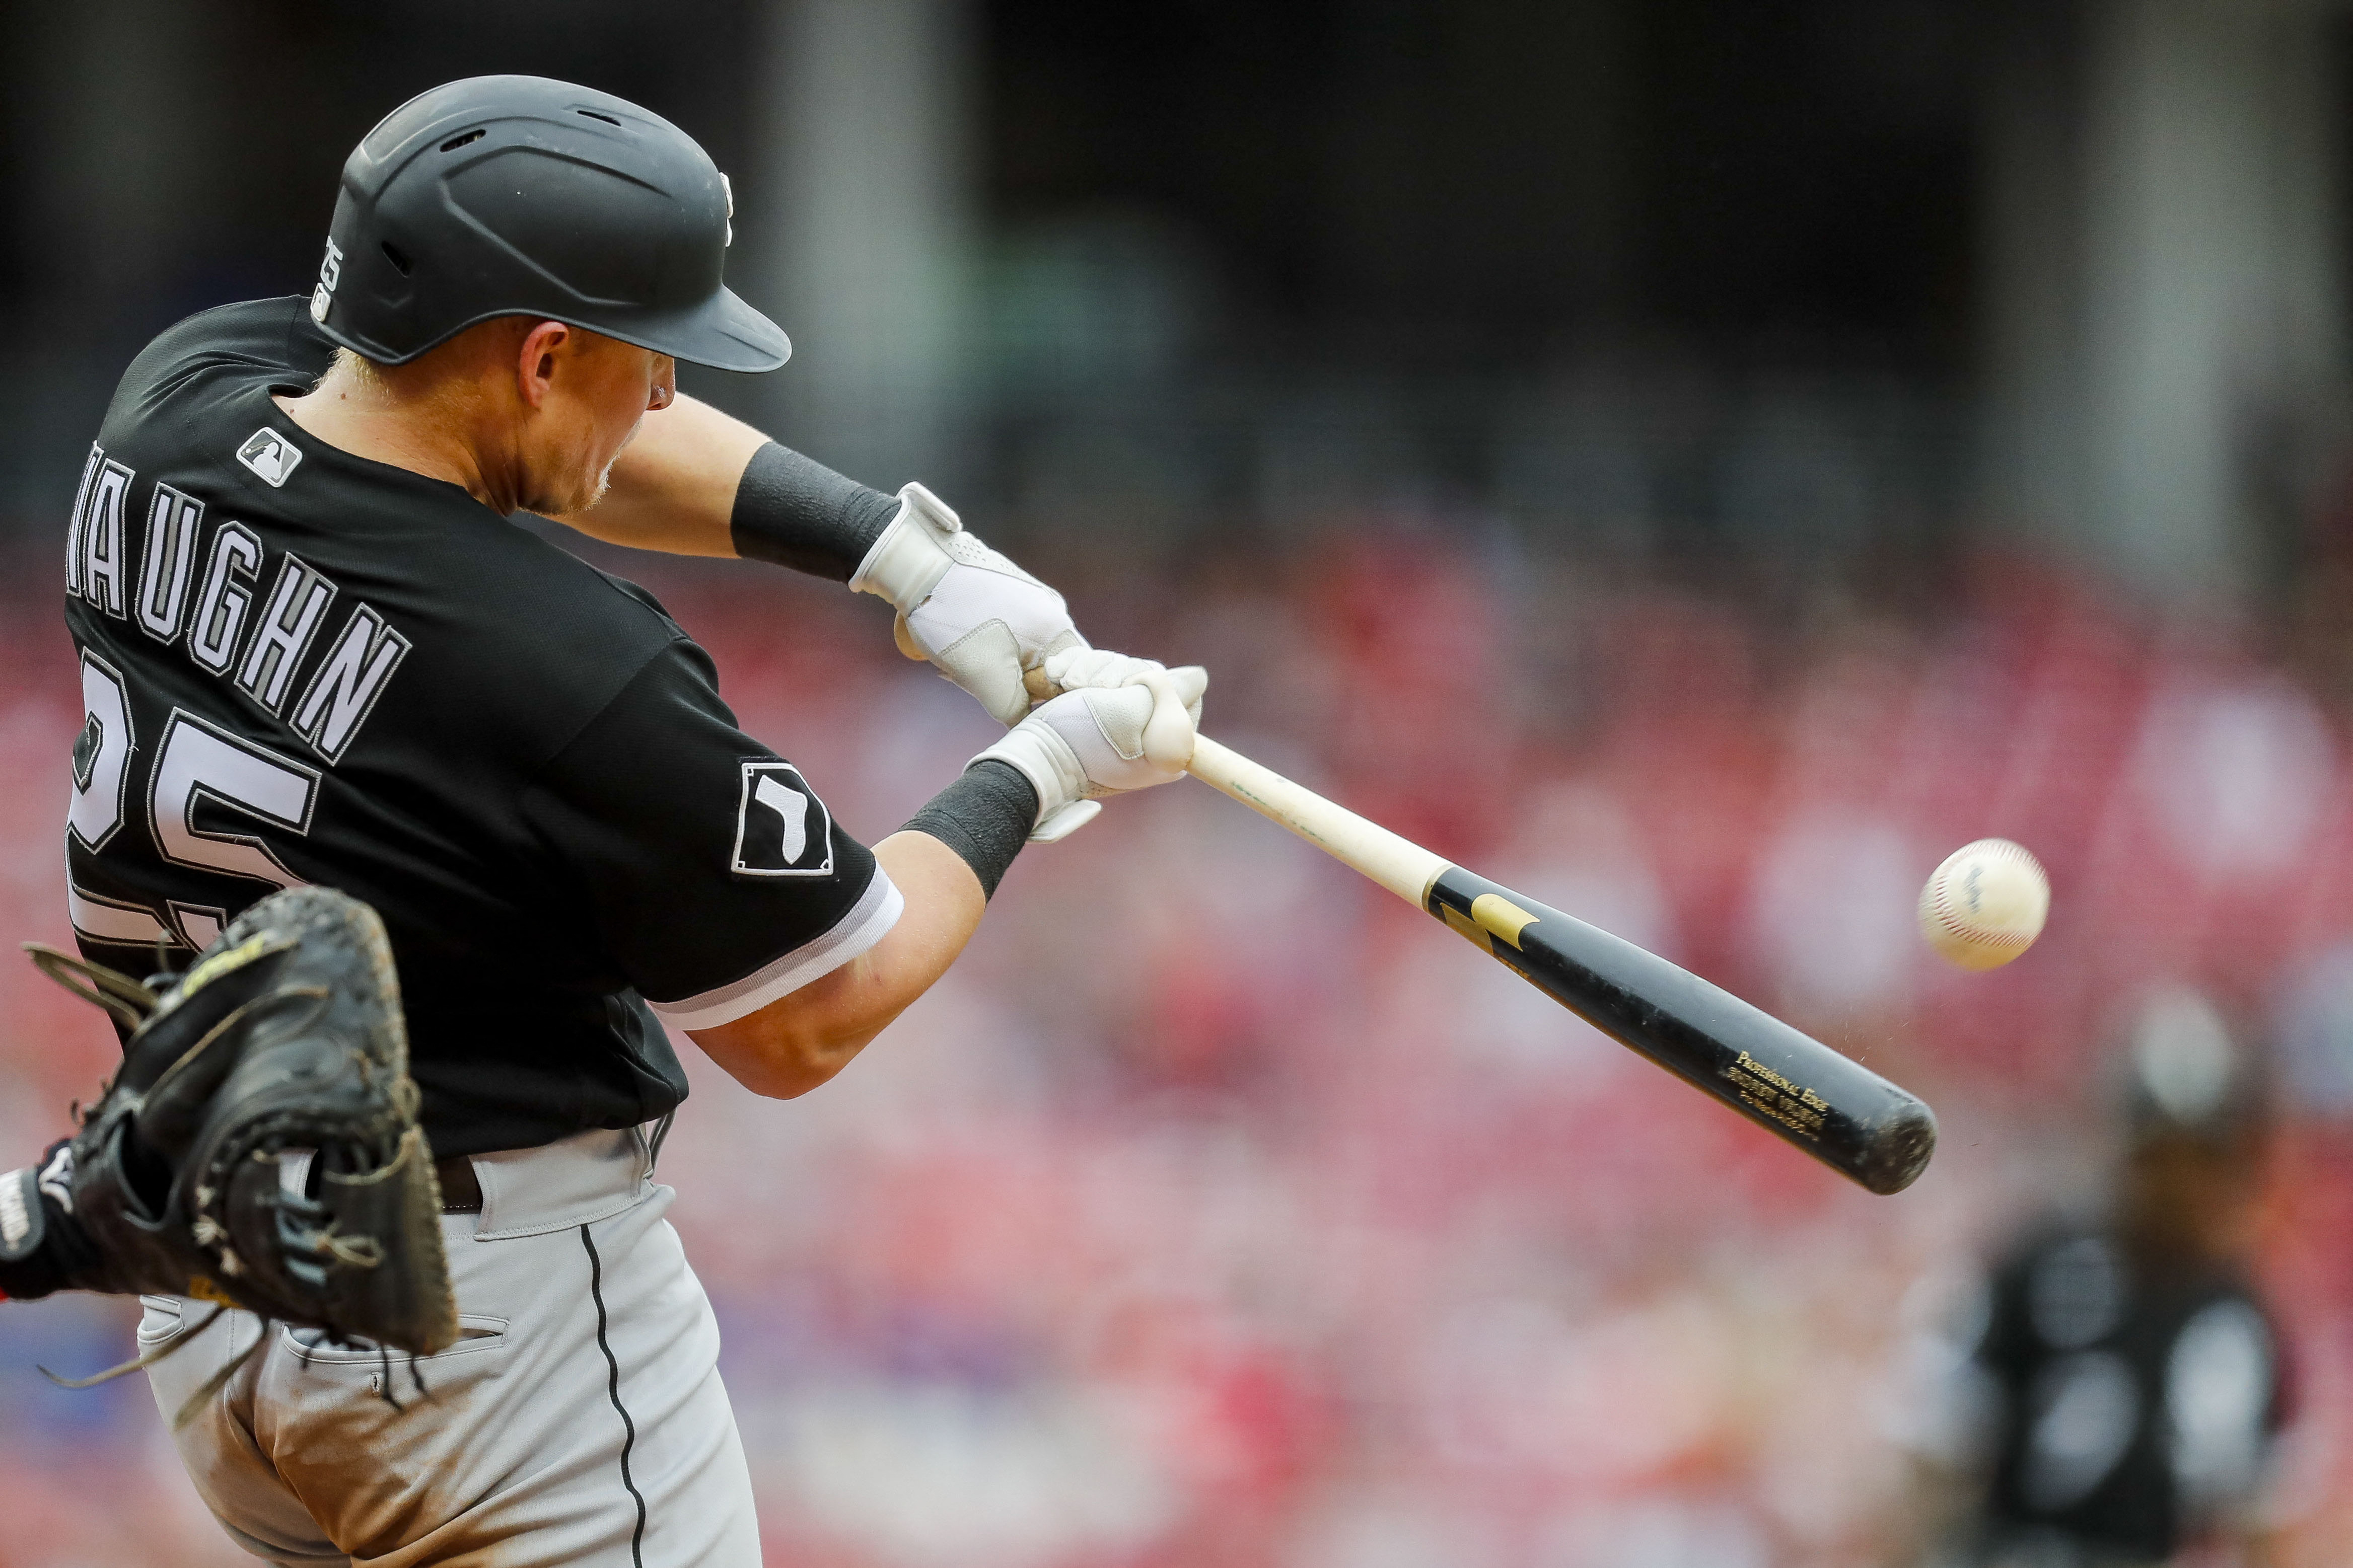 Sunday runday: White Sox score 11 in 2nd, thump Reds 17-4